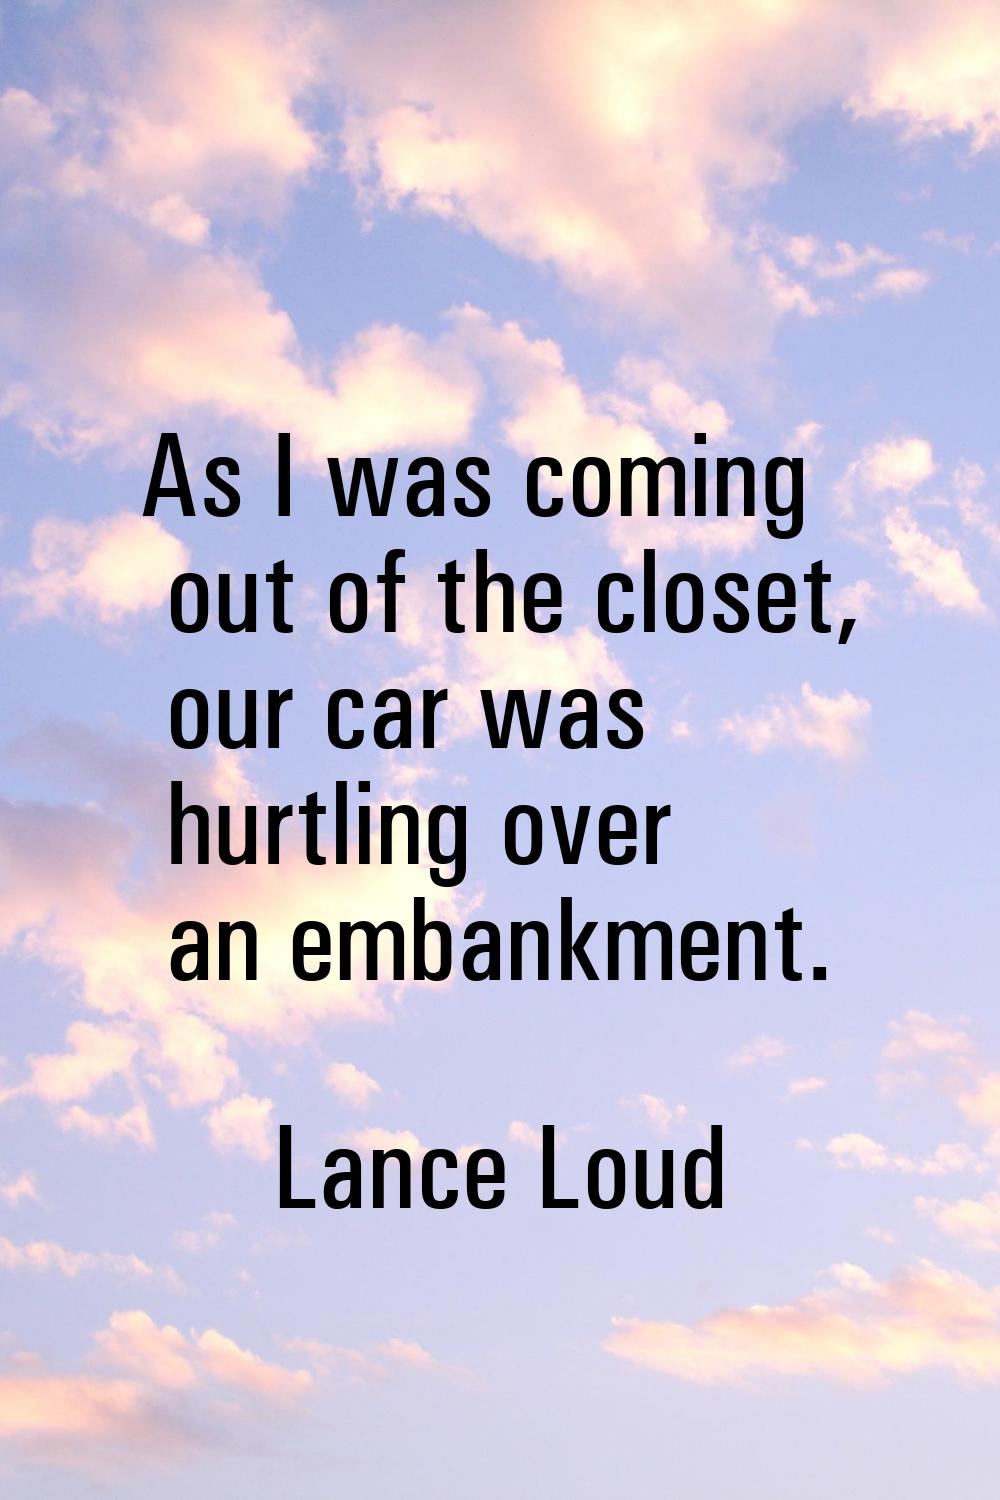 As I was coming out of the closet, our car was hurtling over an embankment.